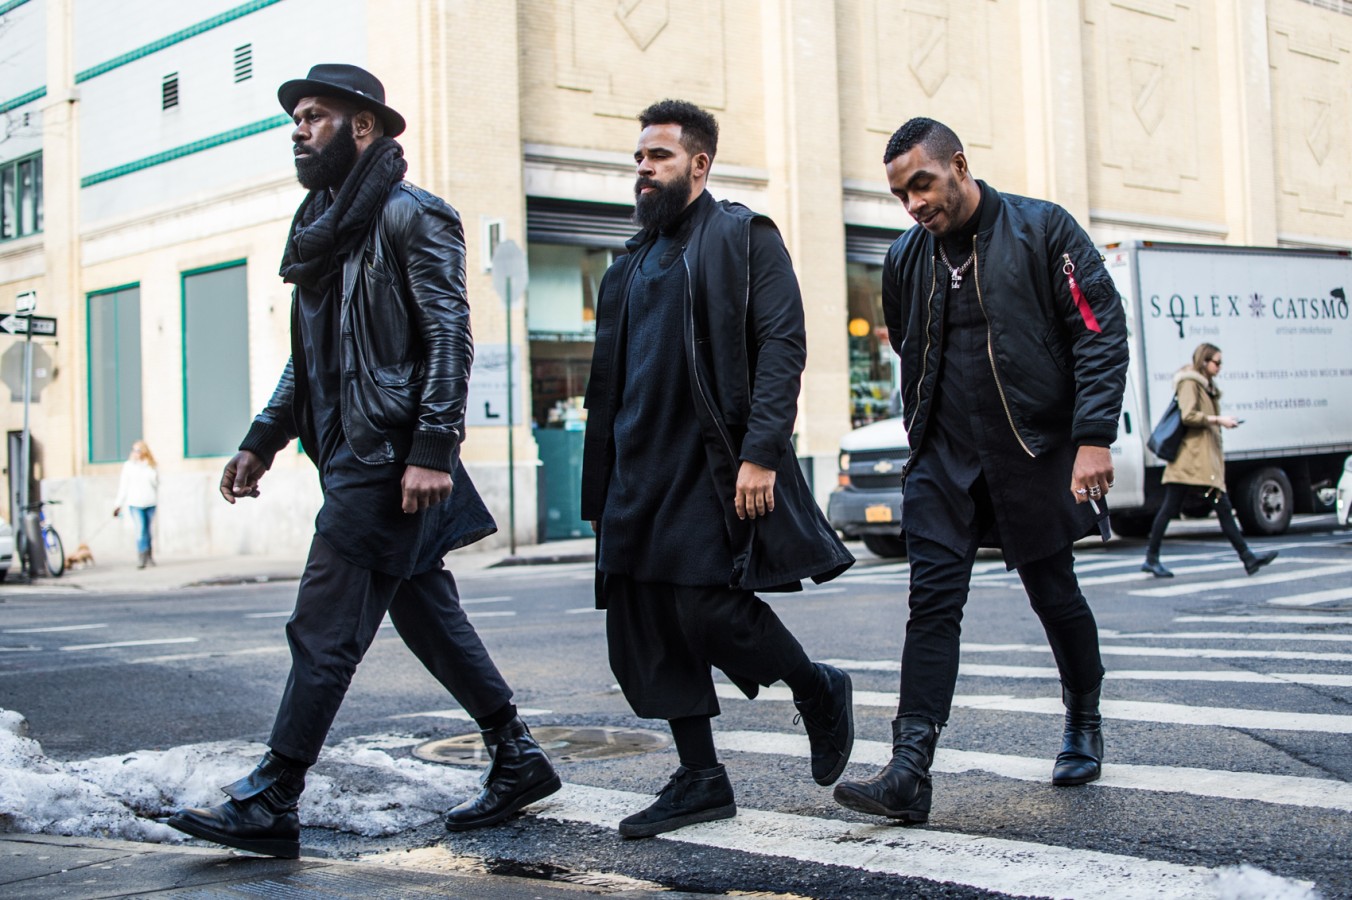 The 35 Best Street Style Looks From New York Men's Fashion Week Sharp